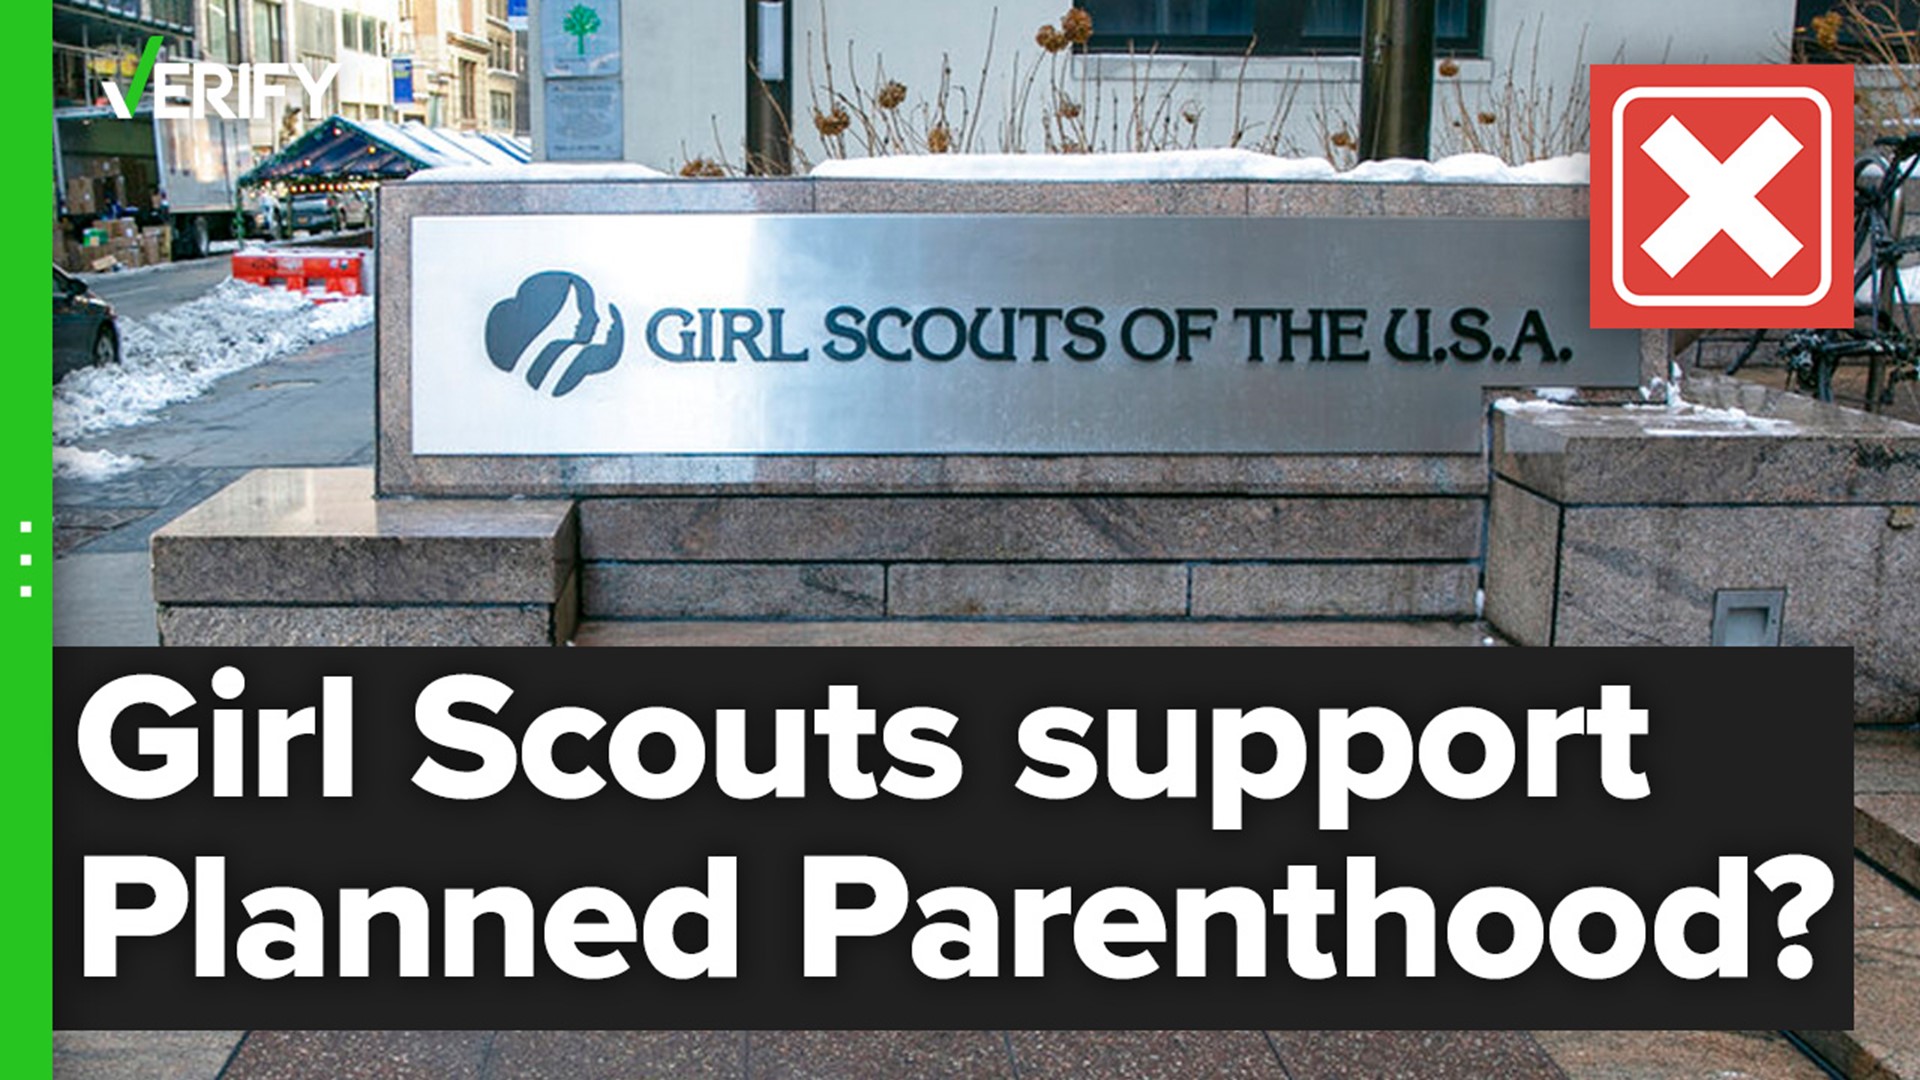 Girl Scouts of the USA “does not have a relationship or partnership with Planned Parenthood,” the organization says on its website.